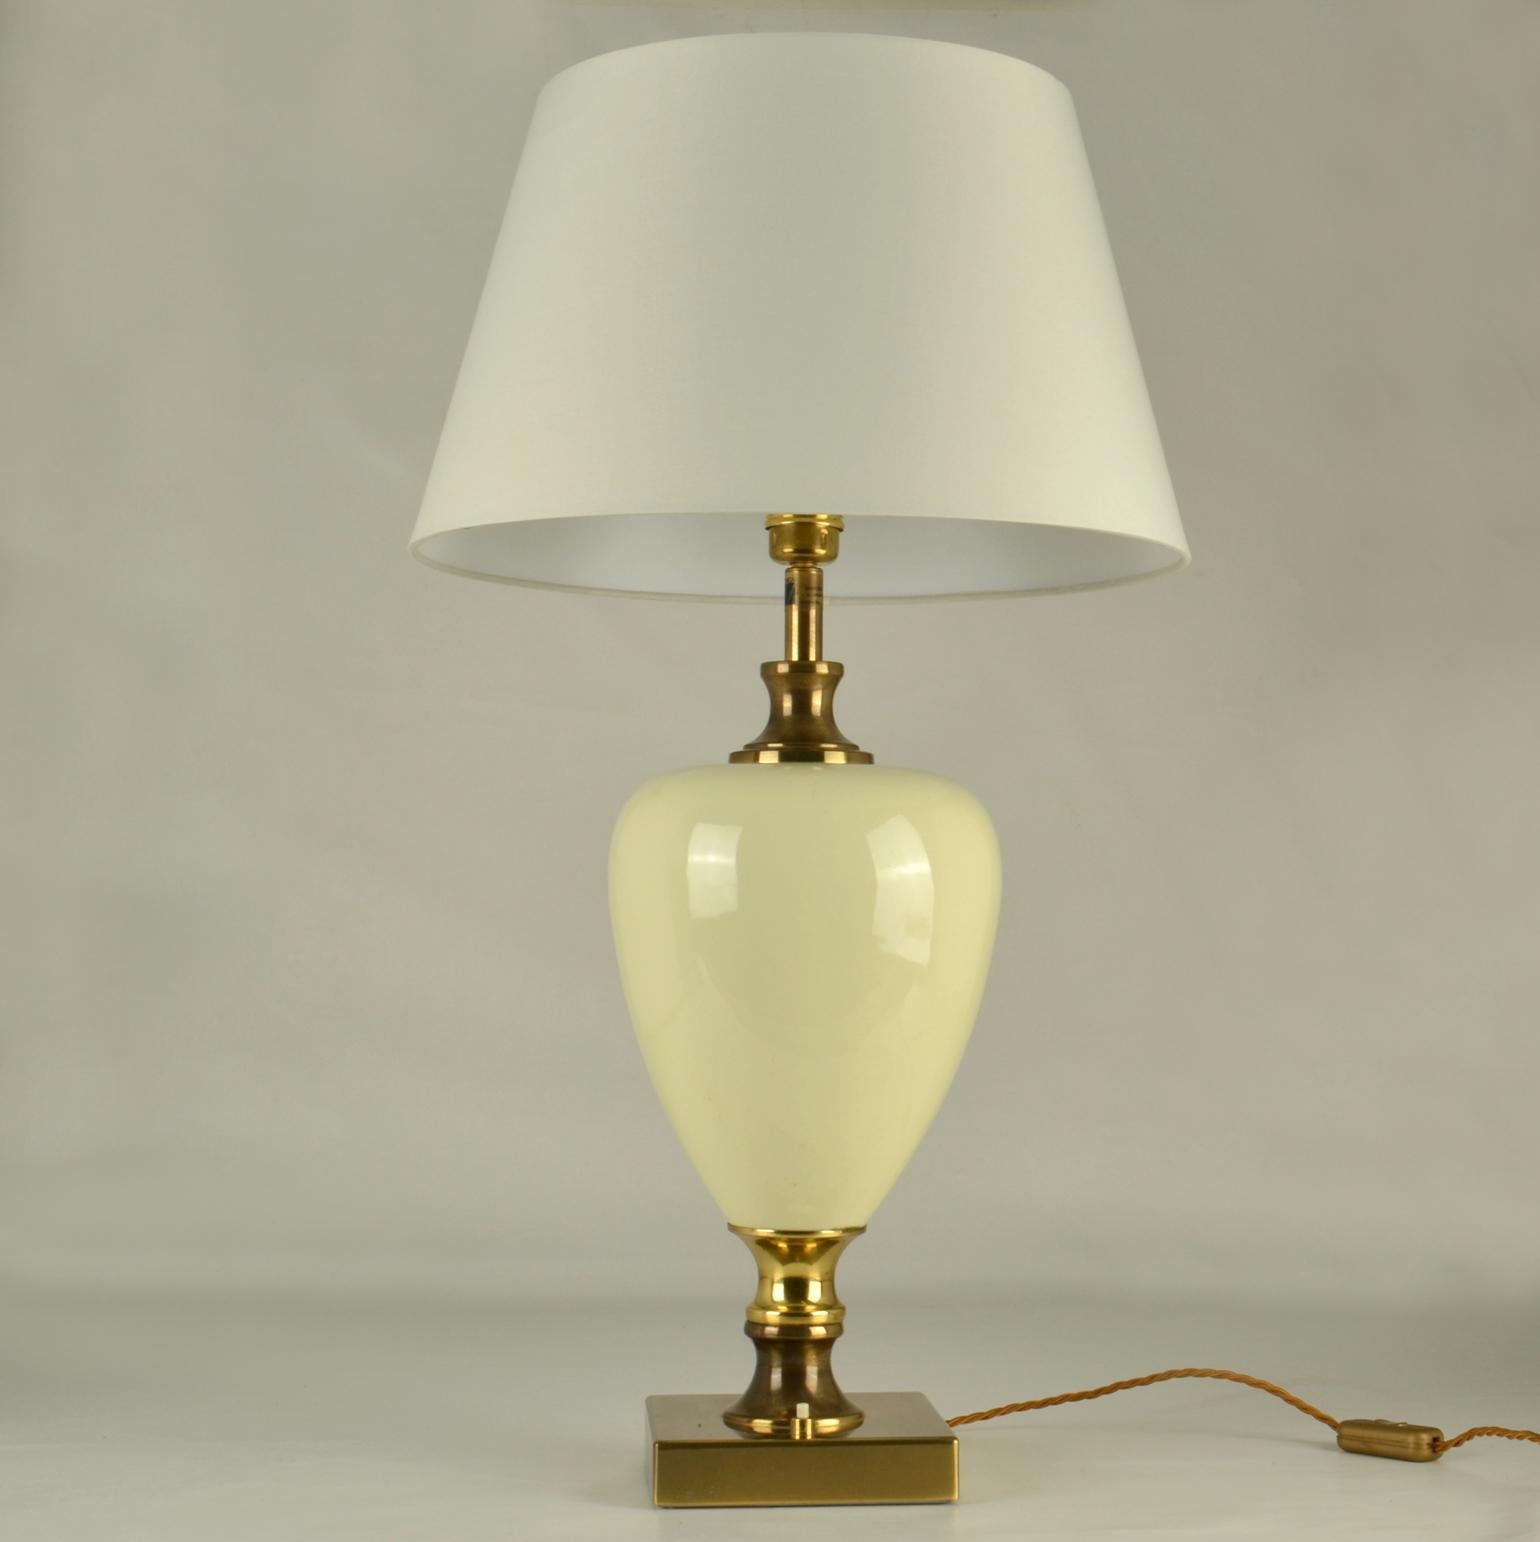 Pair of Cream Porcelain and Brass Table Lamps by Zonca, Italy, 1970s For Sale 3